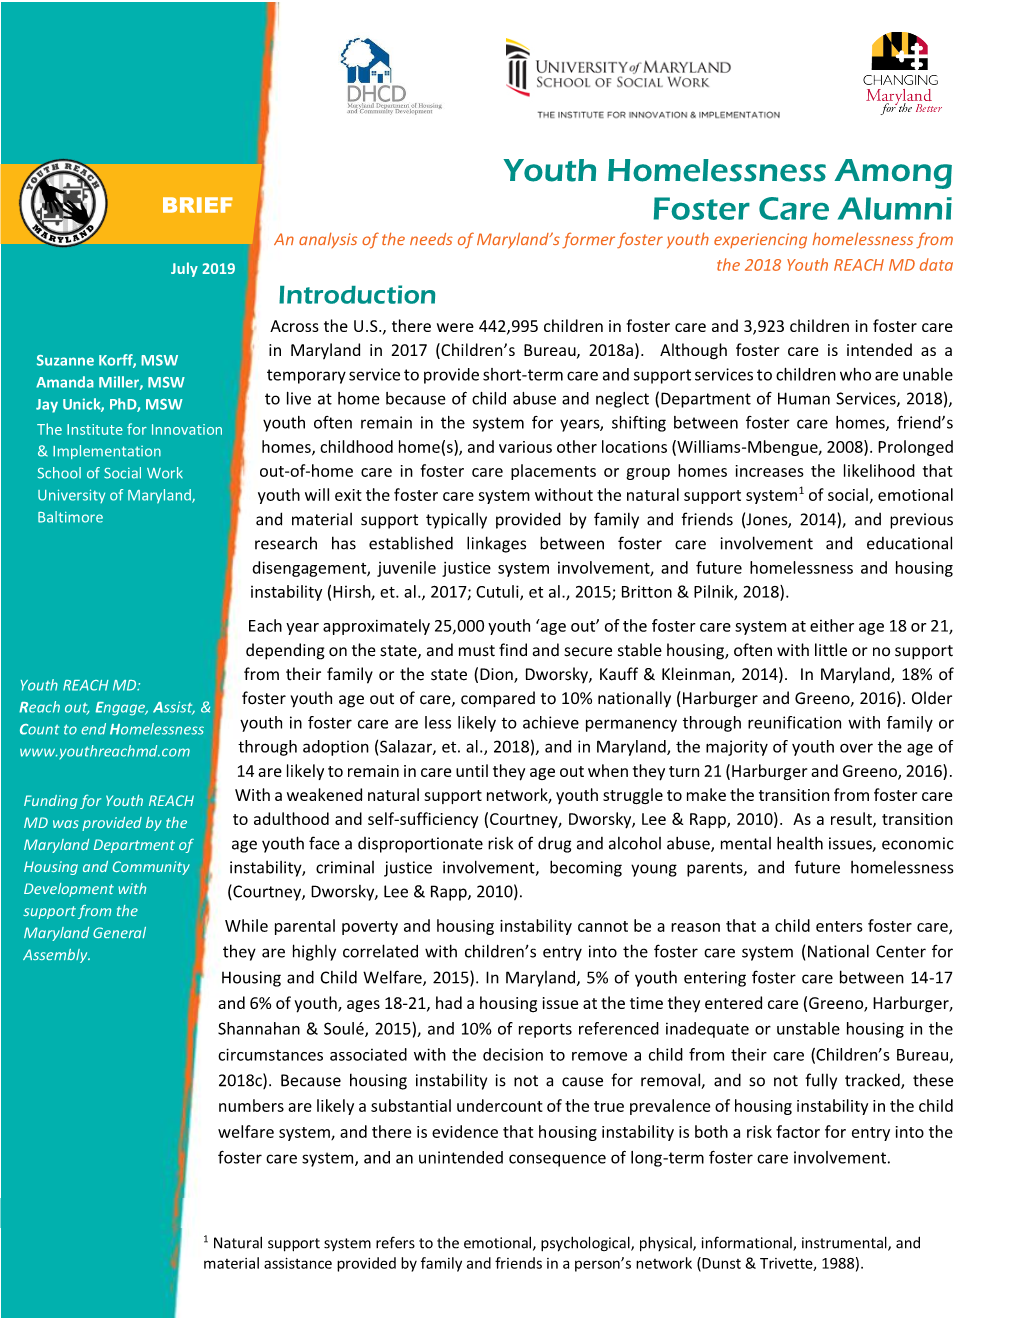 Youth Homelessness Among Foster Care Alumni